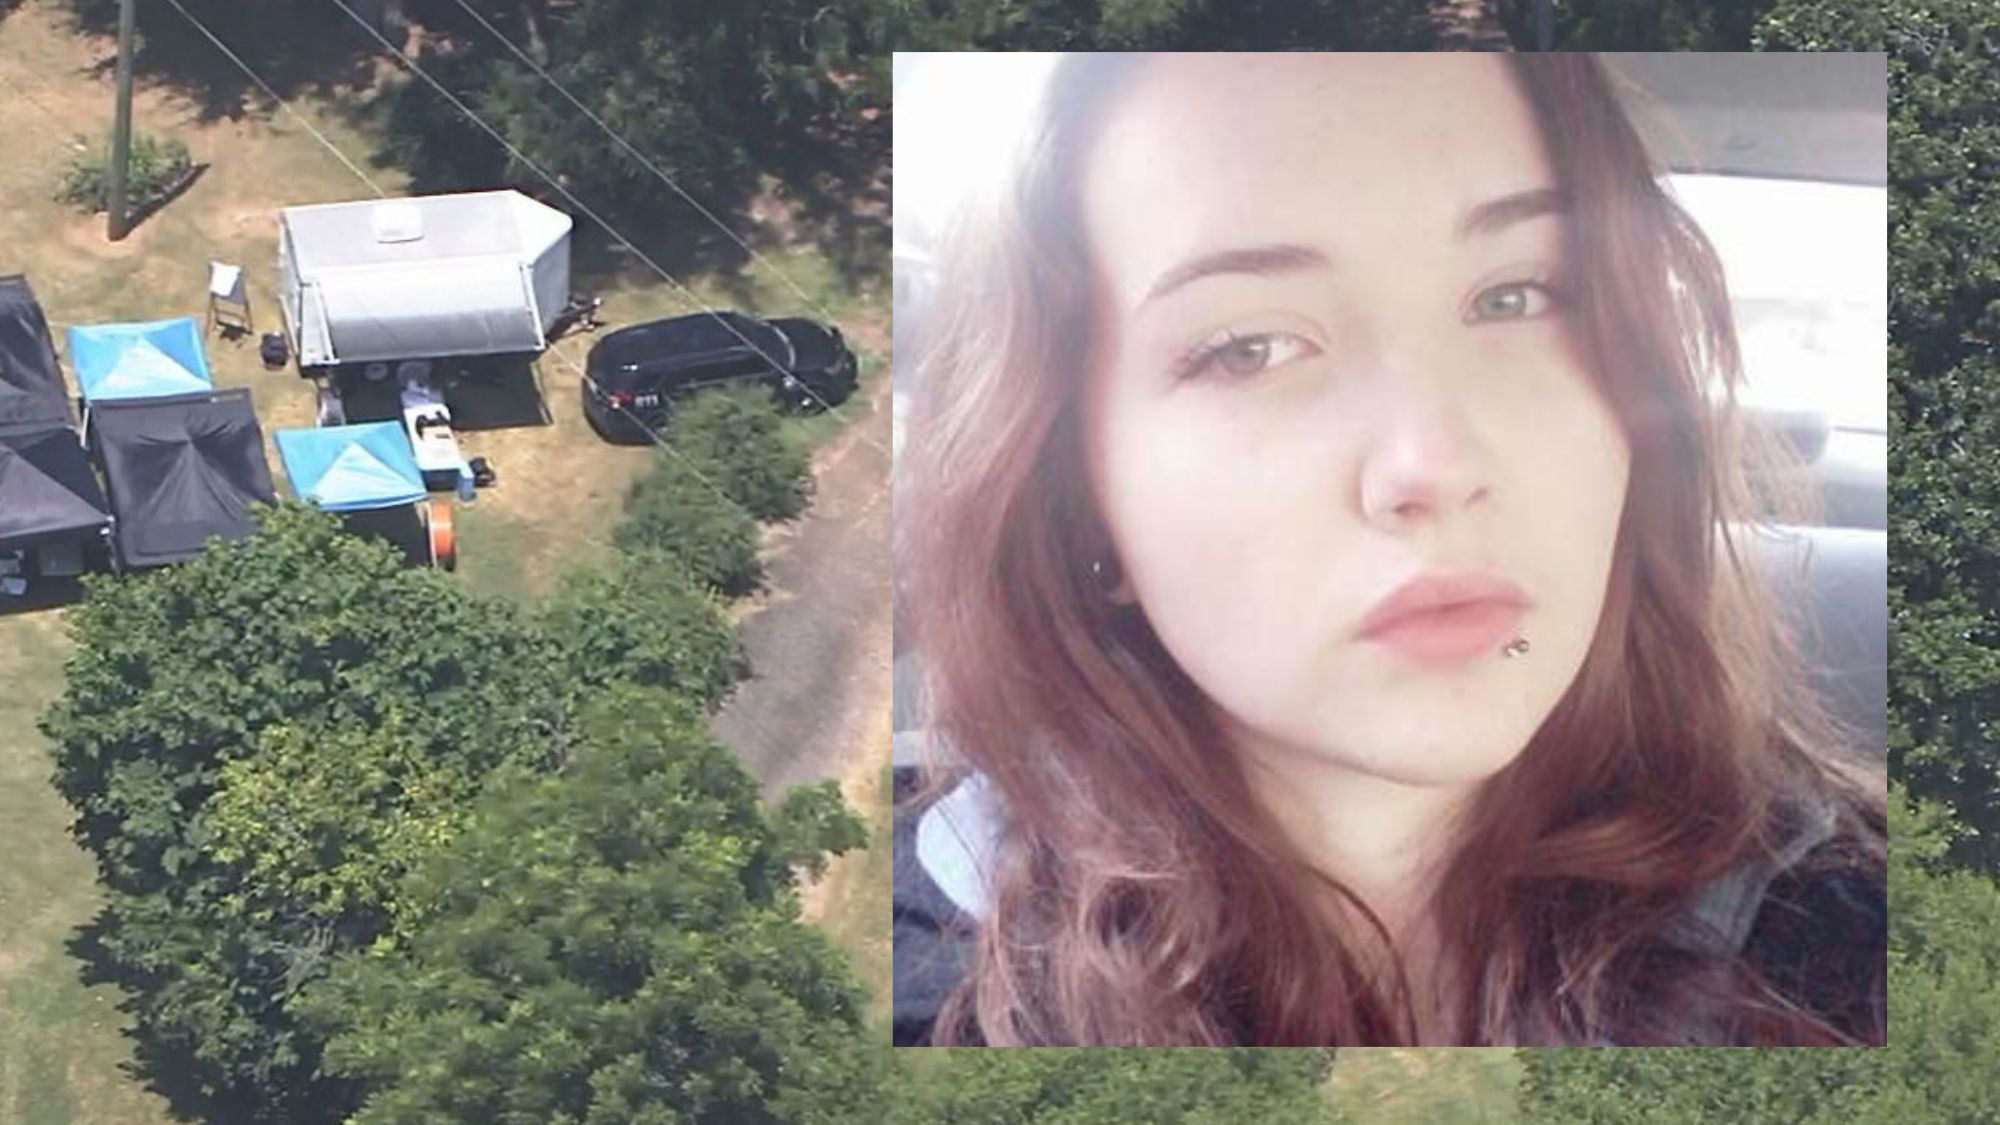 Fbi Police Searching Home In Porterdale 7 Years After 19 Year Old Woman Vanished